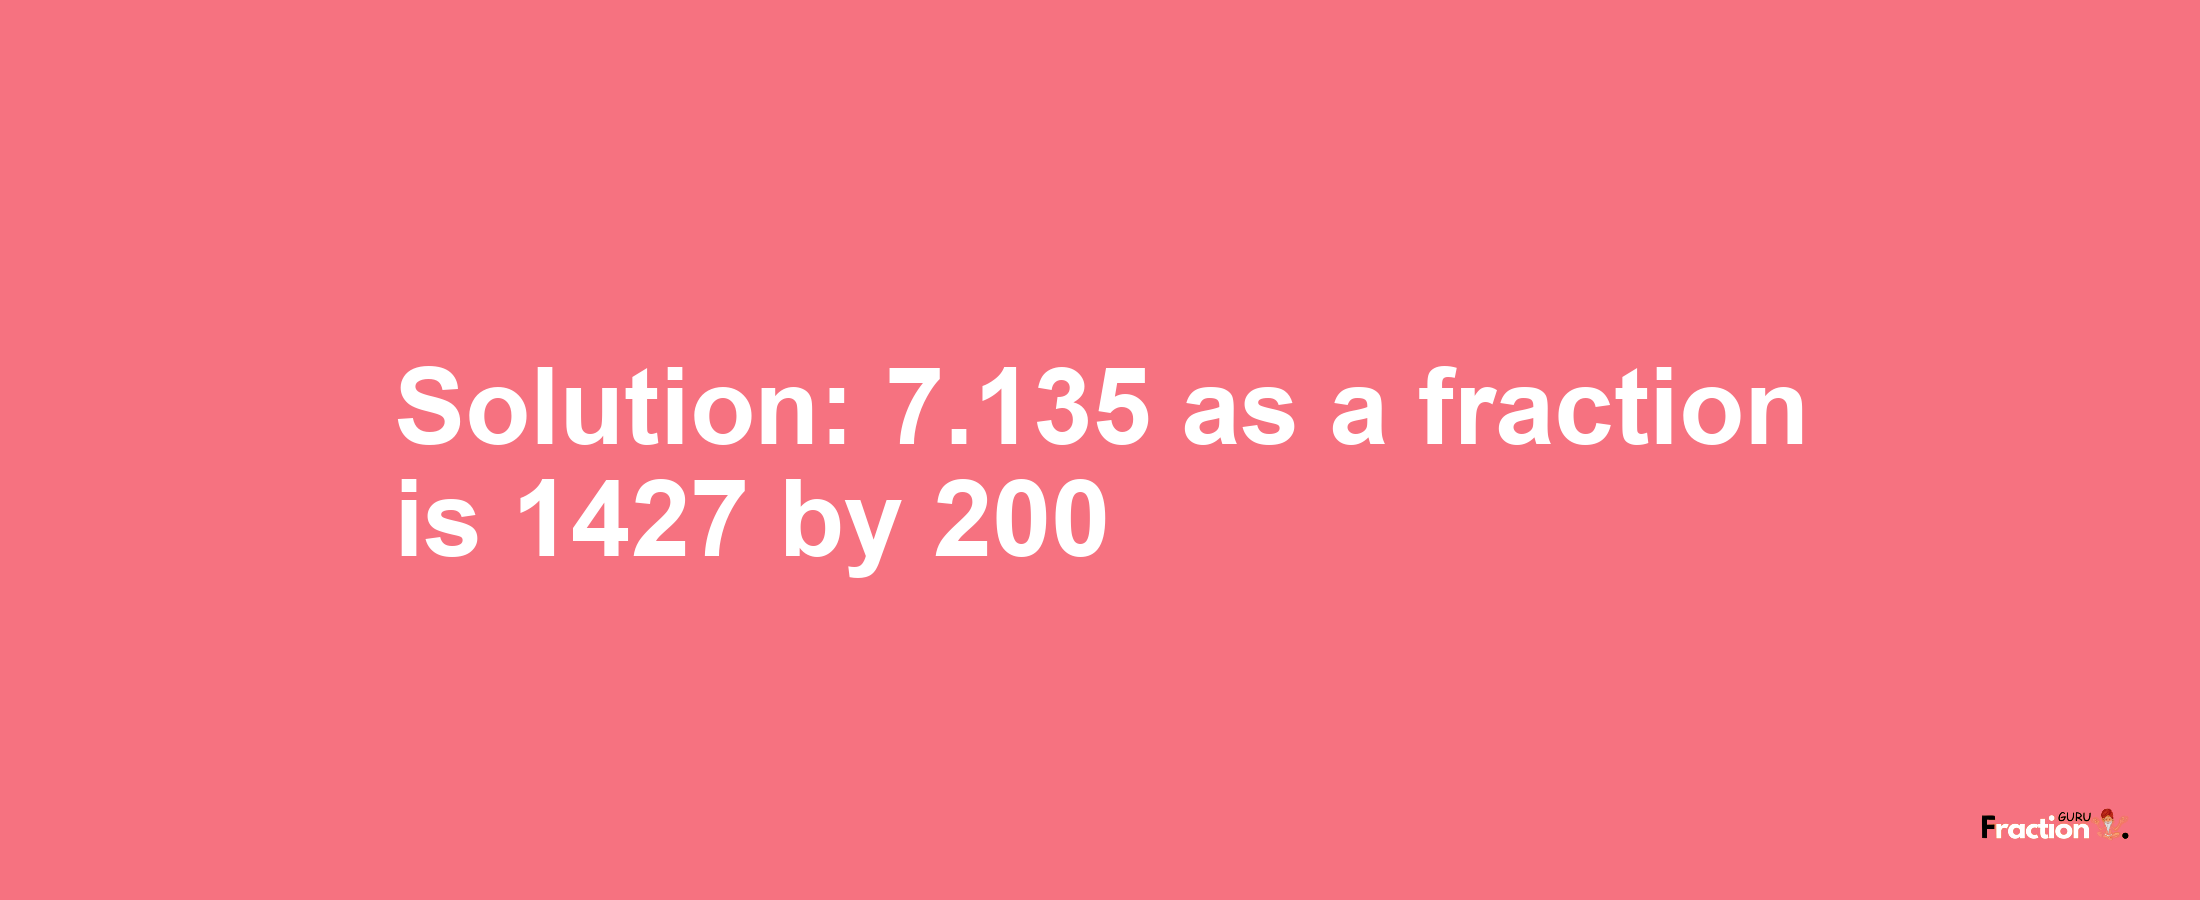 Solution:7.135 as a fraction is 1427/200